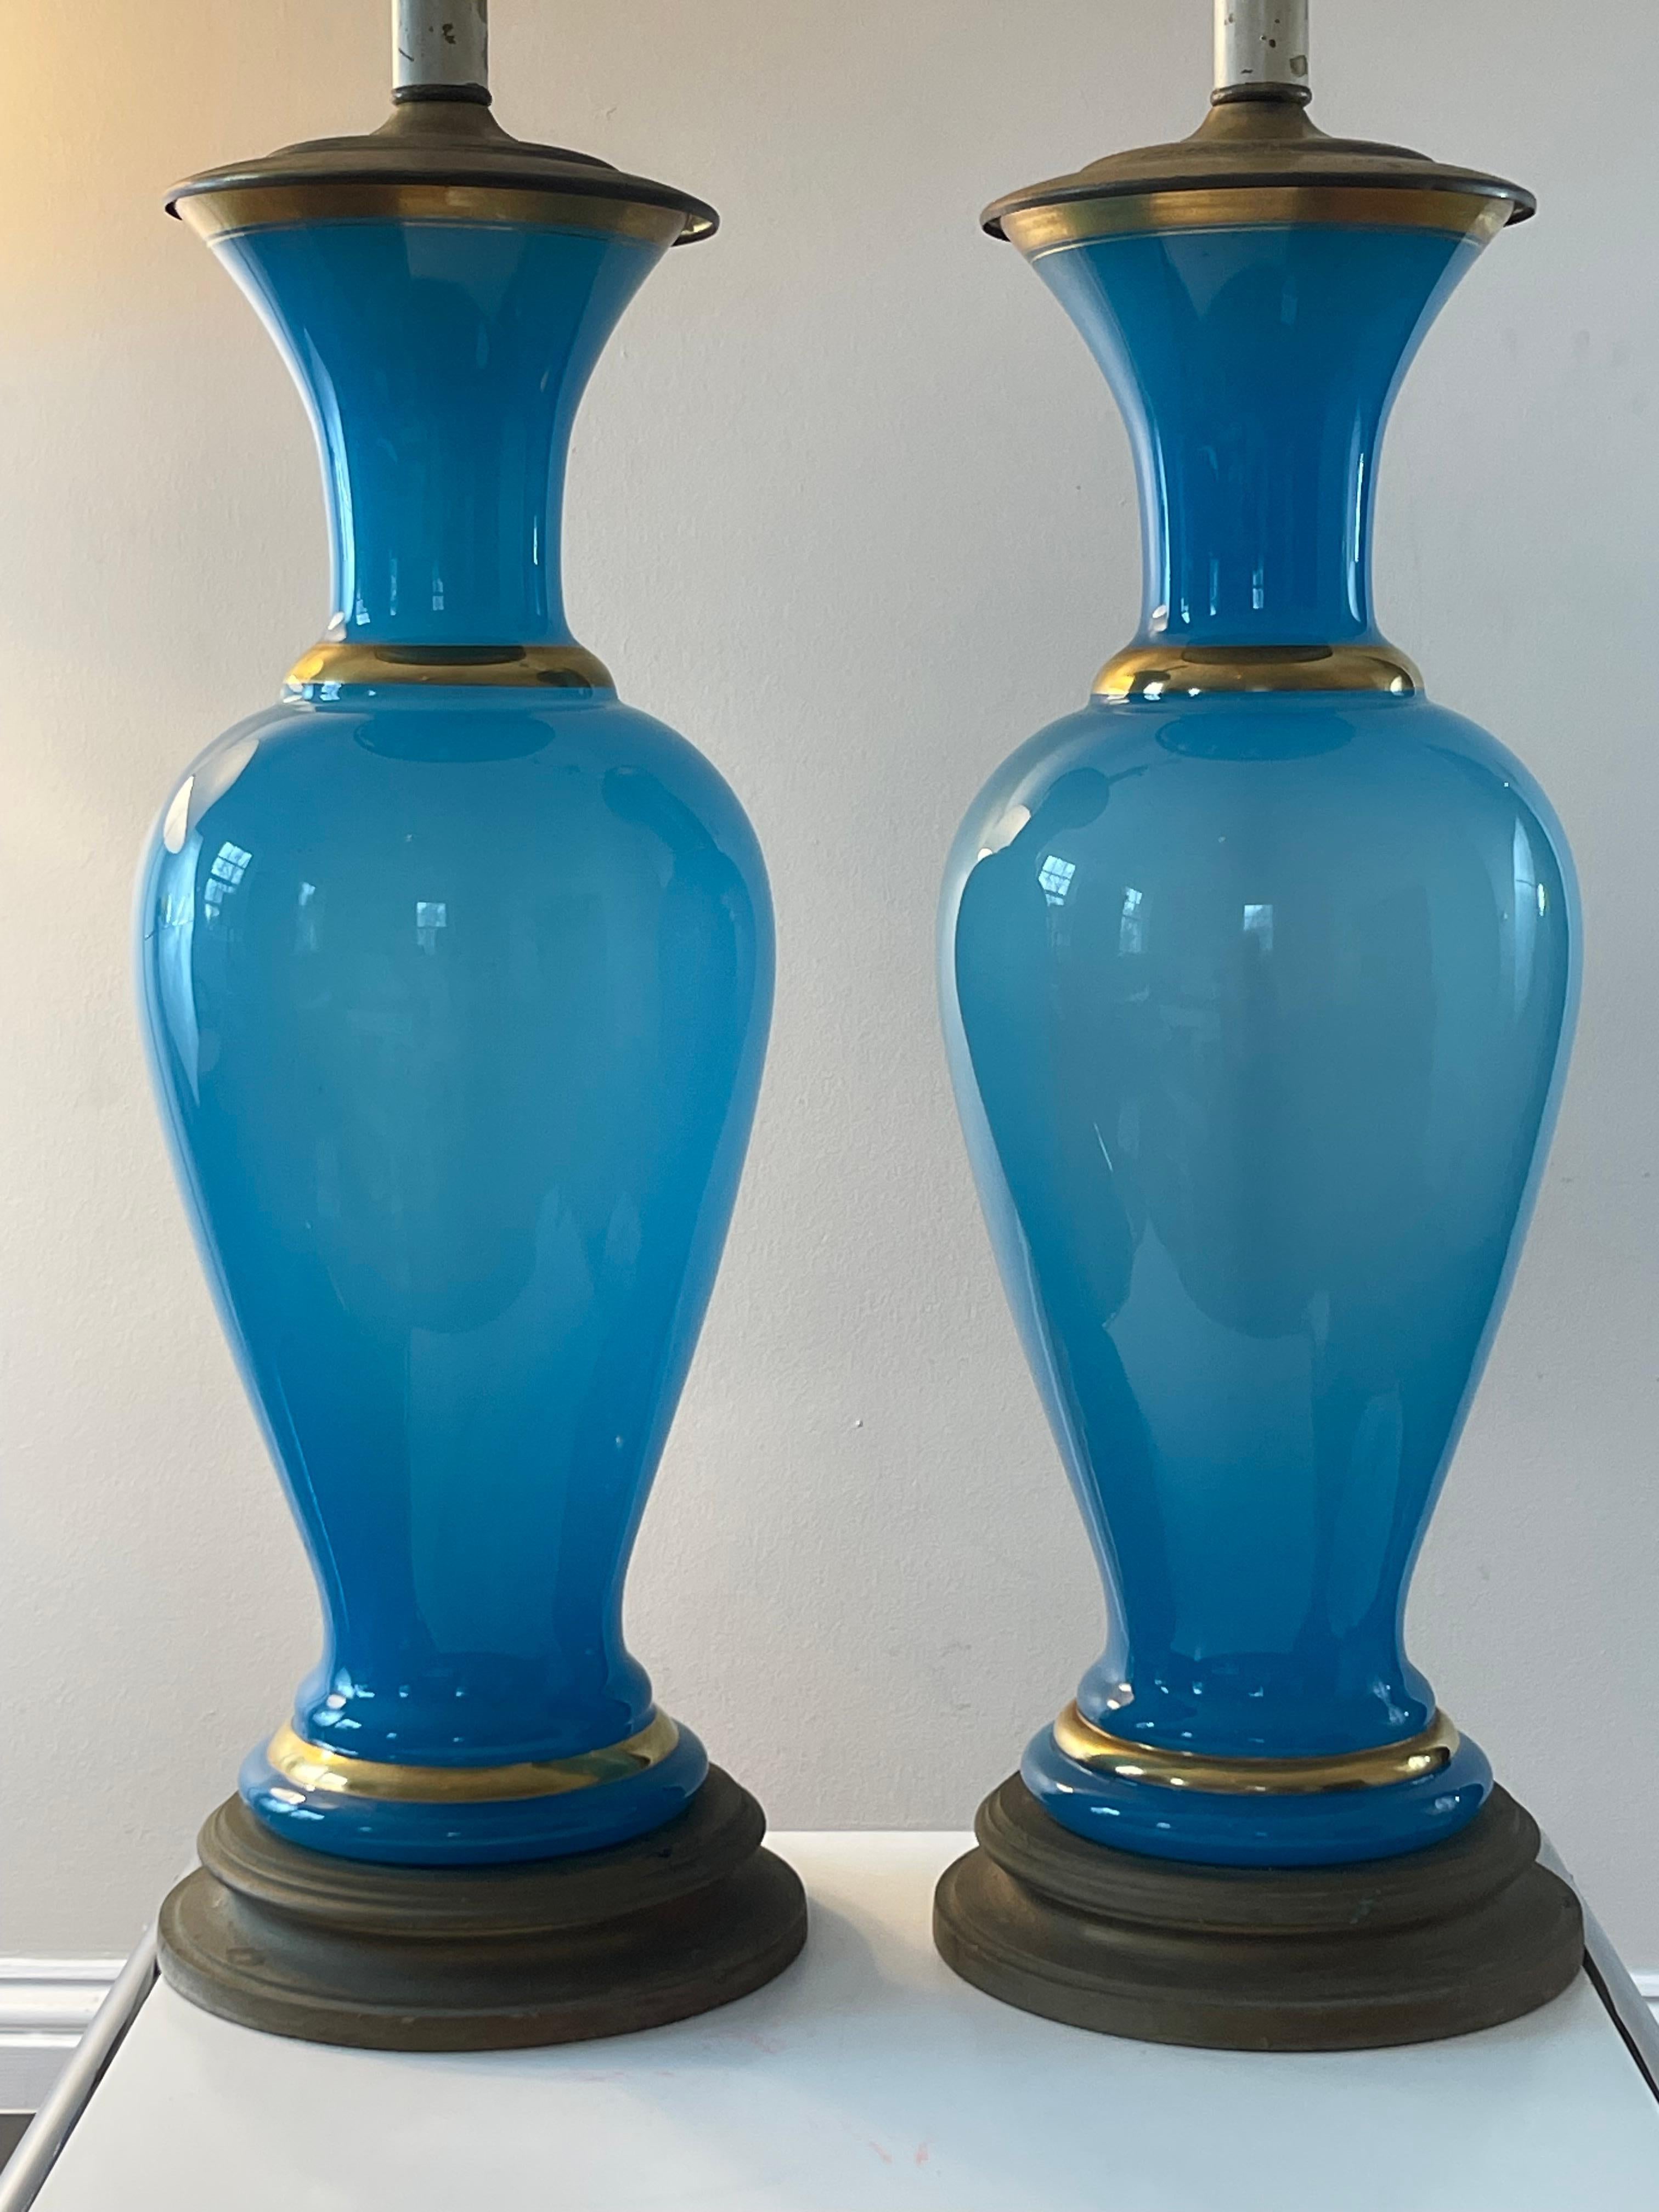 Serene turquoise glass lamps in French opaline with gilt detailing. Lamps are in working order but rewiring is recommended. Please note: glass body measures 19.5” in height; lamp measures 43” to top of finial.